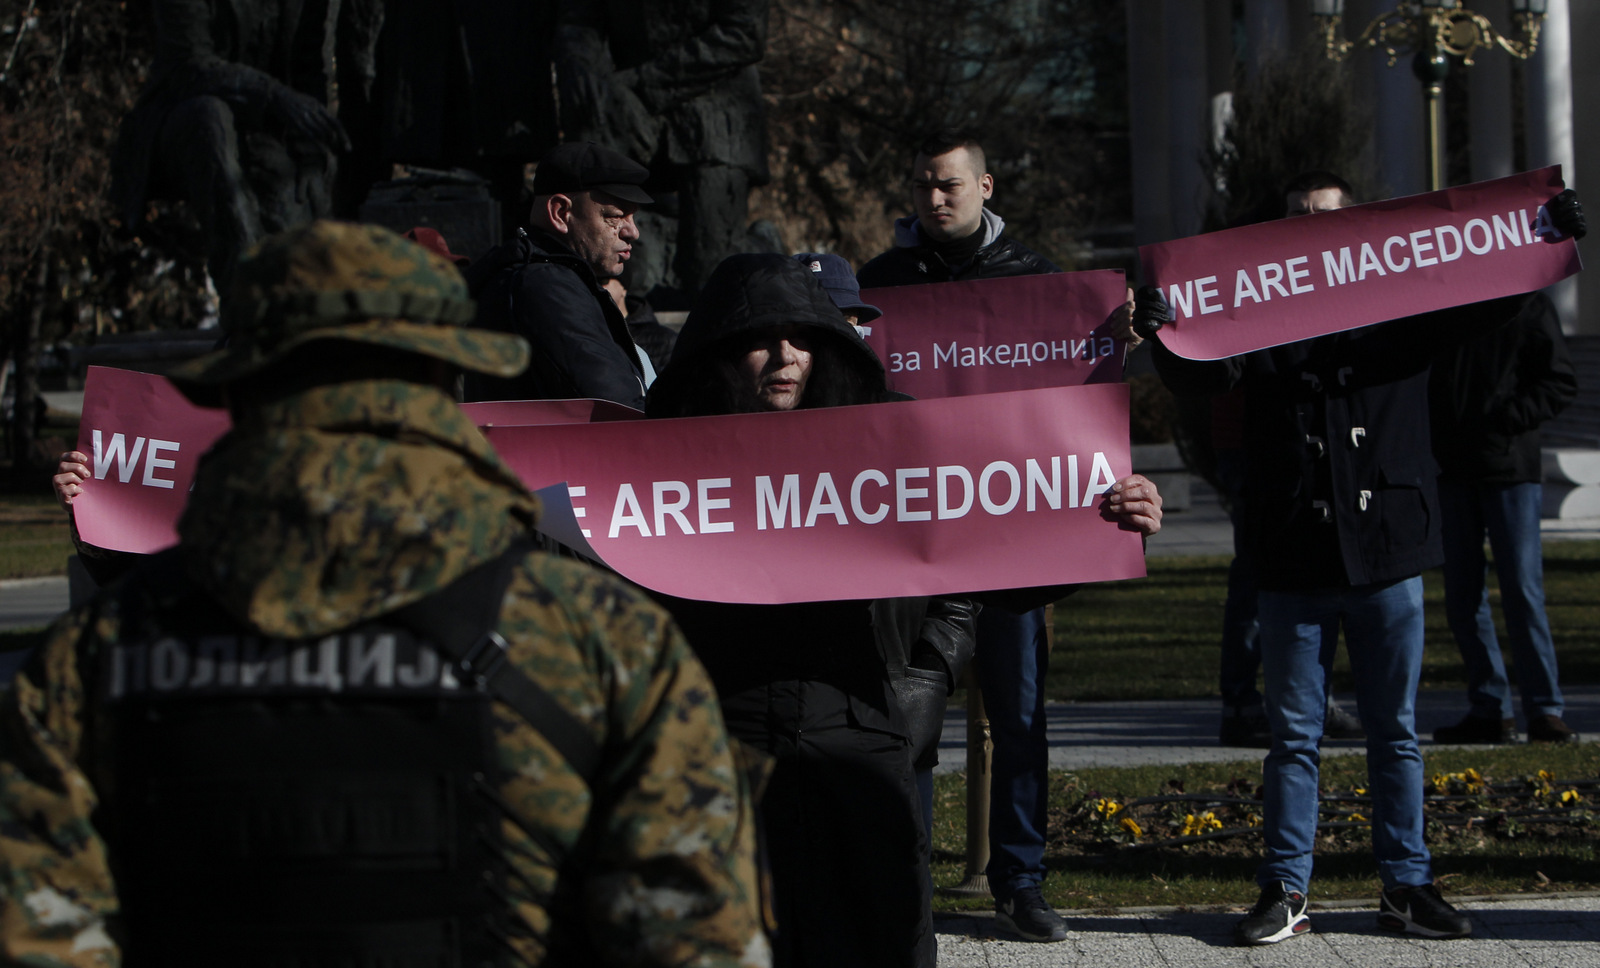 A group of people hold banners reading "We are Macedonia" during anti NATO protest in front of the Parliament in Skopje, Macedonia, while NATO Secretary General Jens Stoltenberg addressed lawmakers in Parliament, Jan. 19, 2018. (AP/Boris Grdanoski)